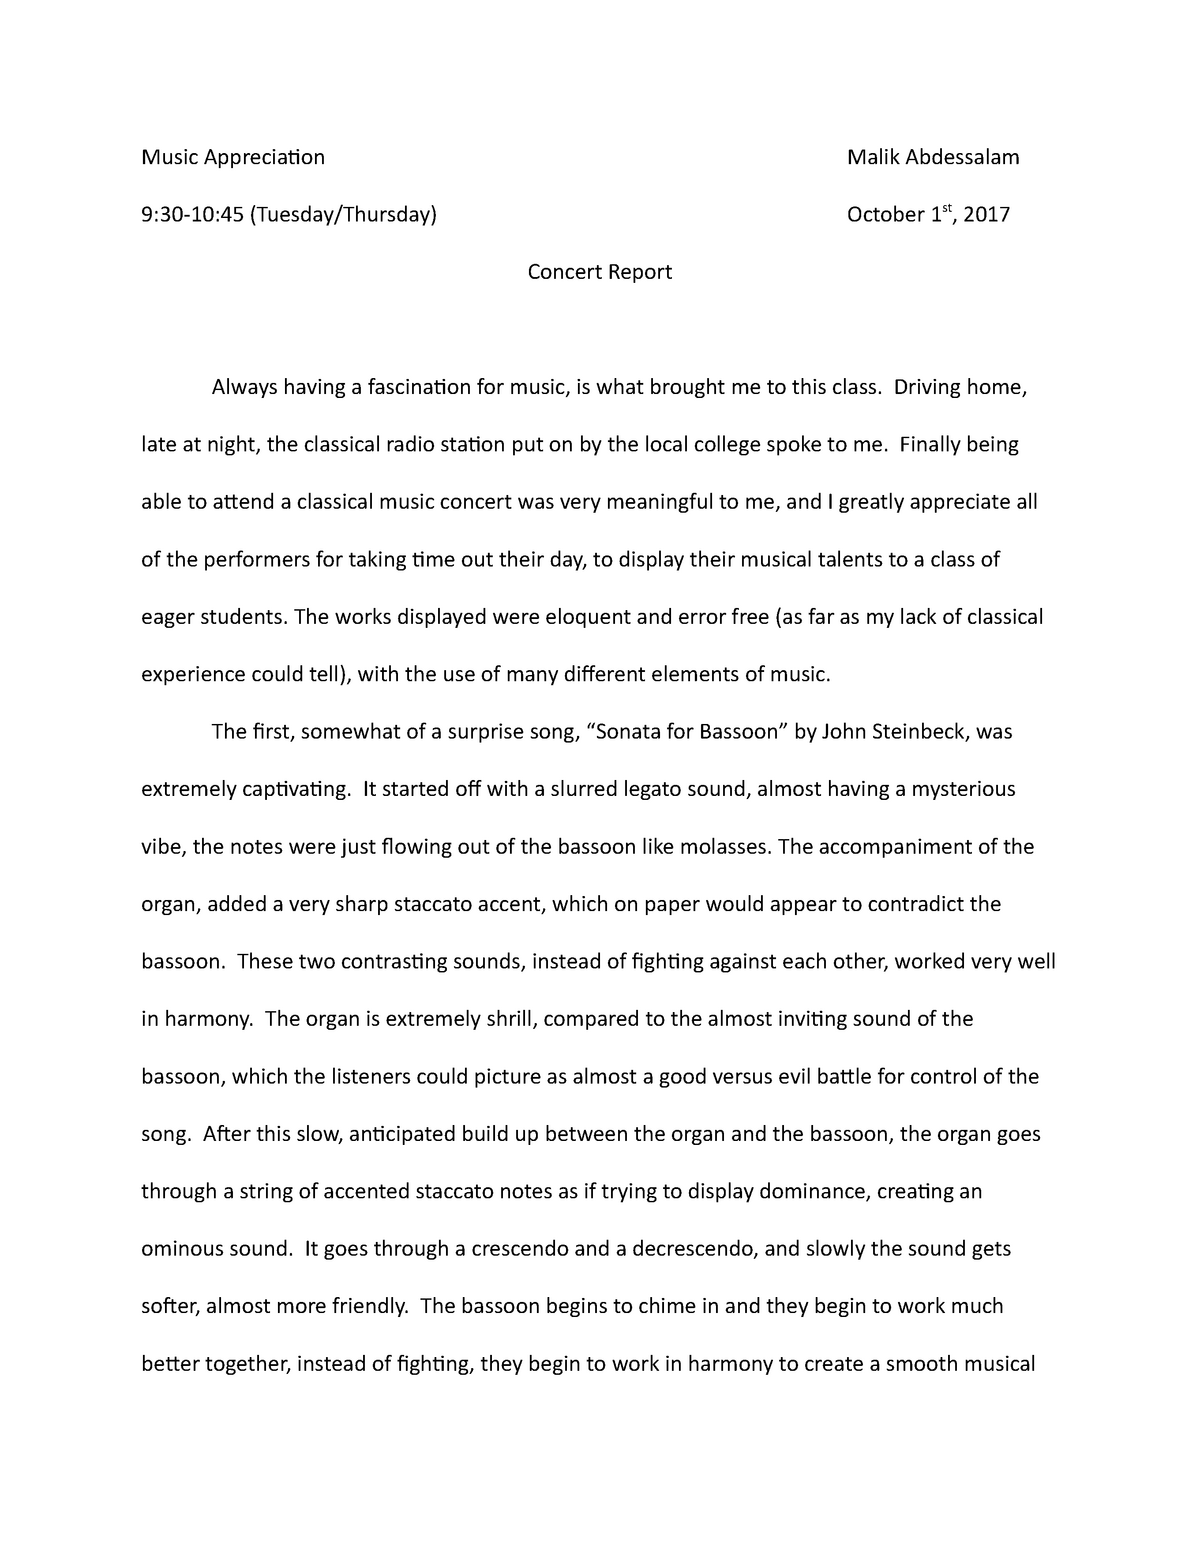 Essay on classical music